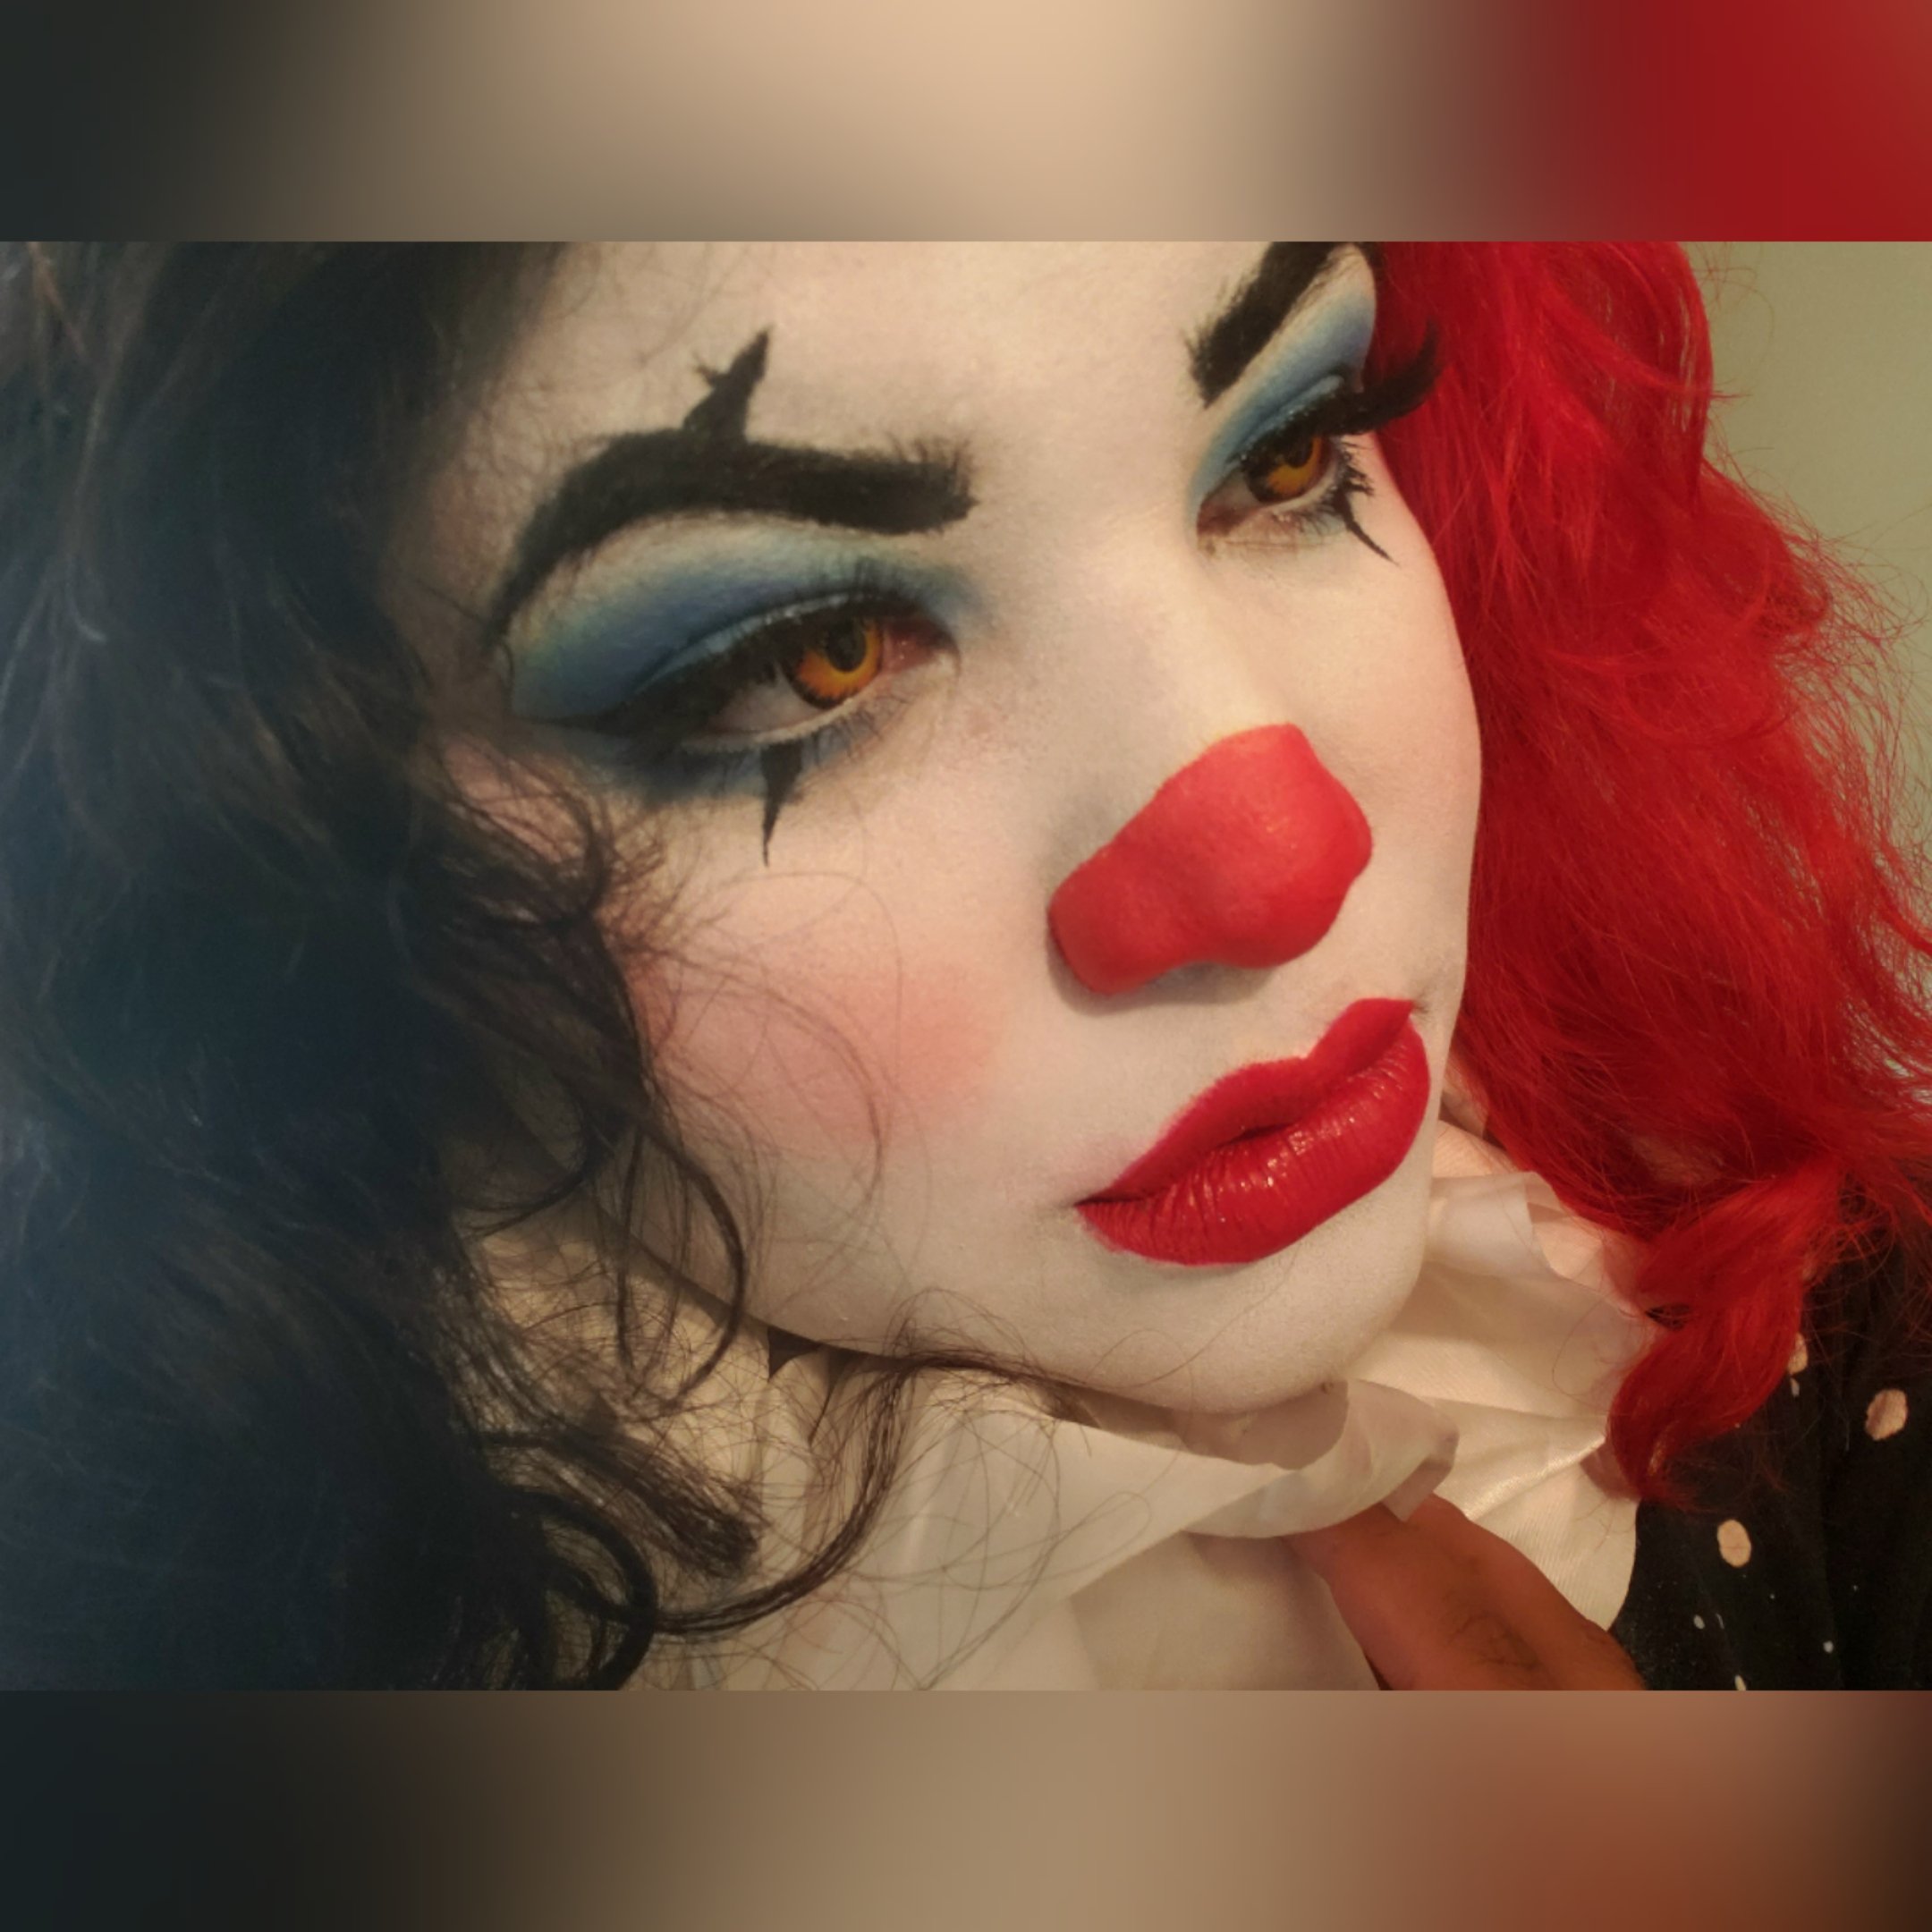 🤡 Cosmo Clown 🪐 on Twitter: Sad clown #pennywise #clown #makeup #clownmakeup #cosplay #femalepennywise #makeupartist https://t.co/I24tWUFDCP" / Twitter